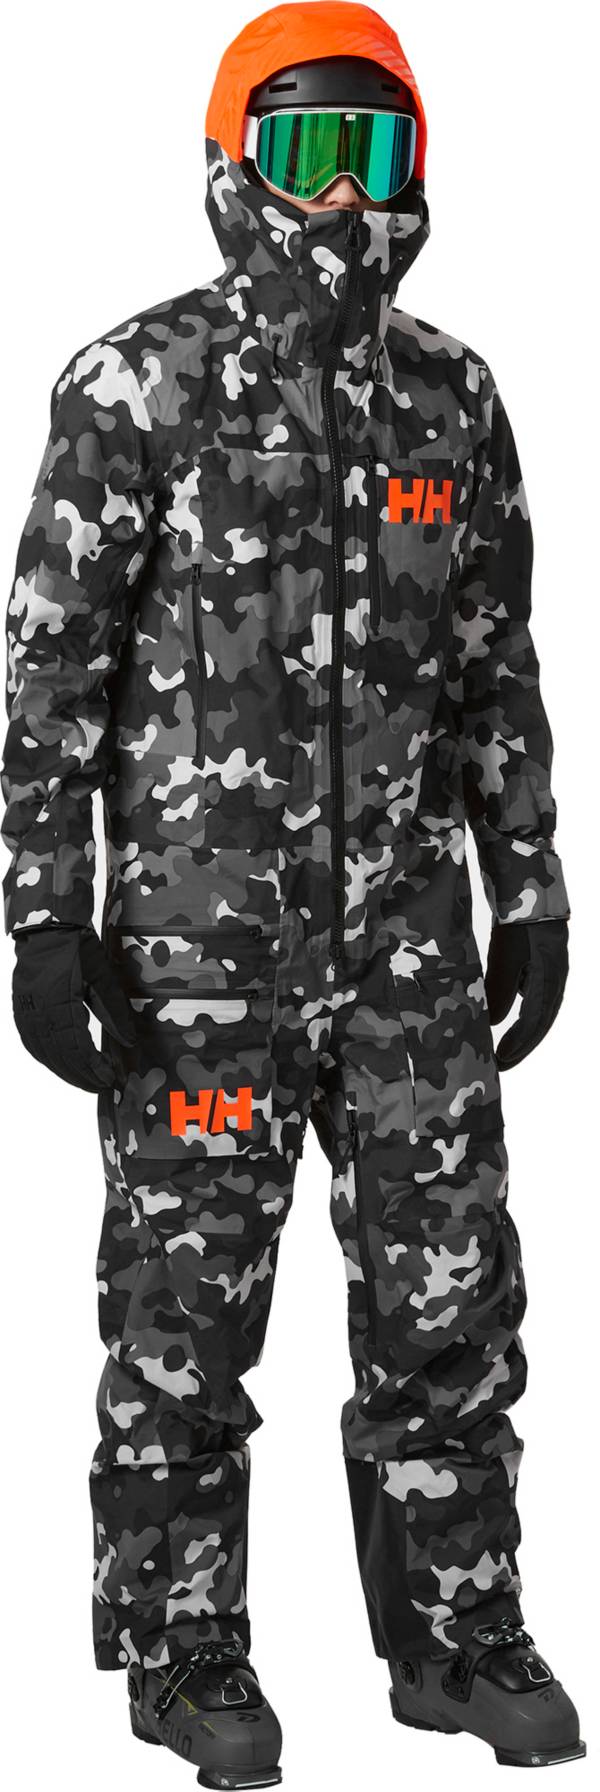 Helly Hansen Men's Chugach Printed Suit product image